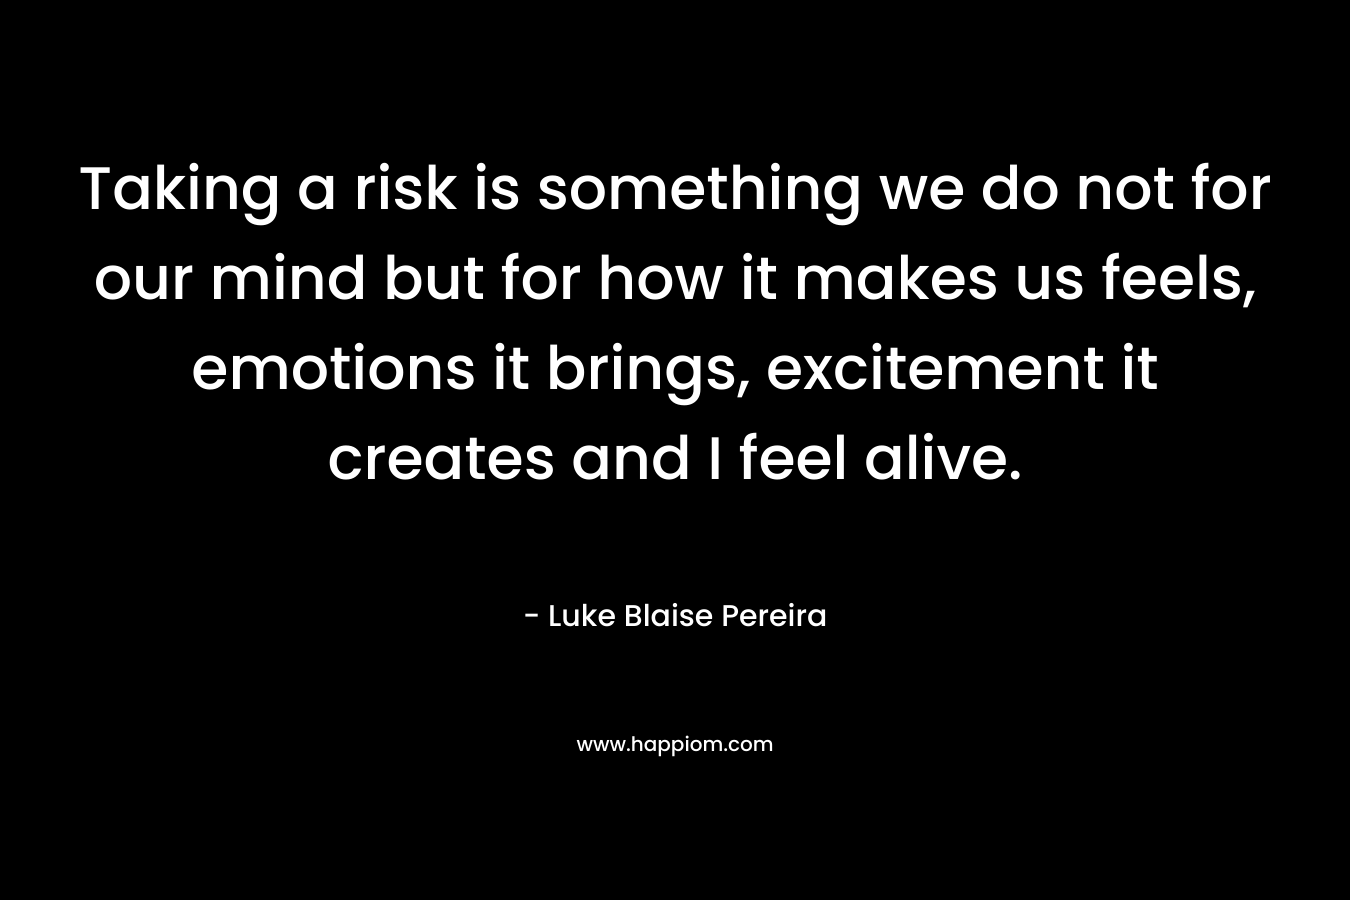 Taking a risk is something we do not for our mind but for how it makes us feels, emotions it brings, excitement it creates and I feel alive.